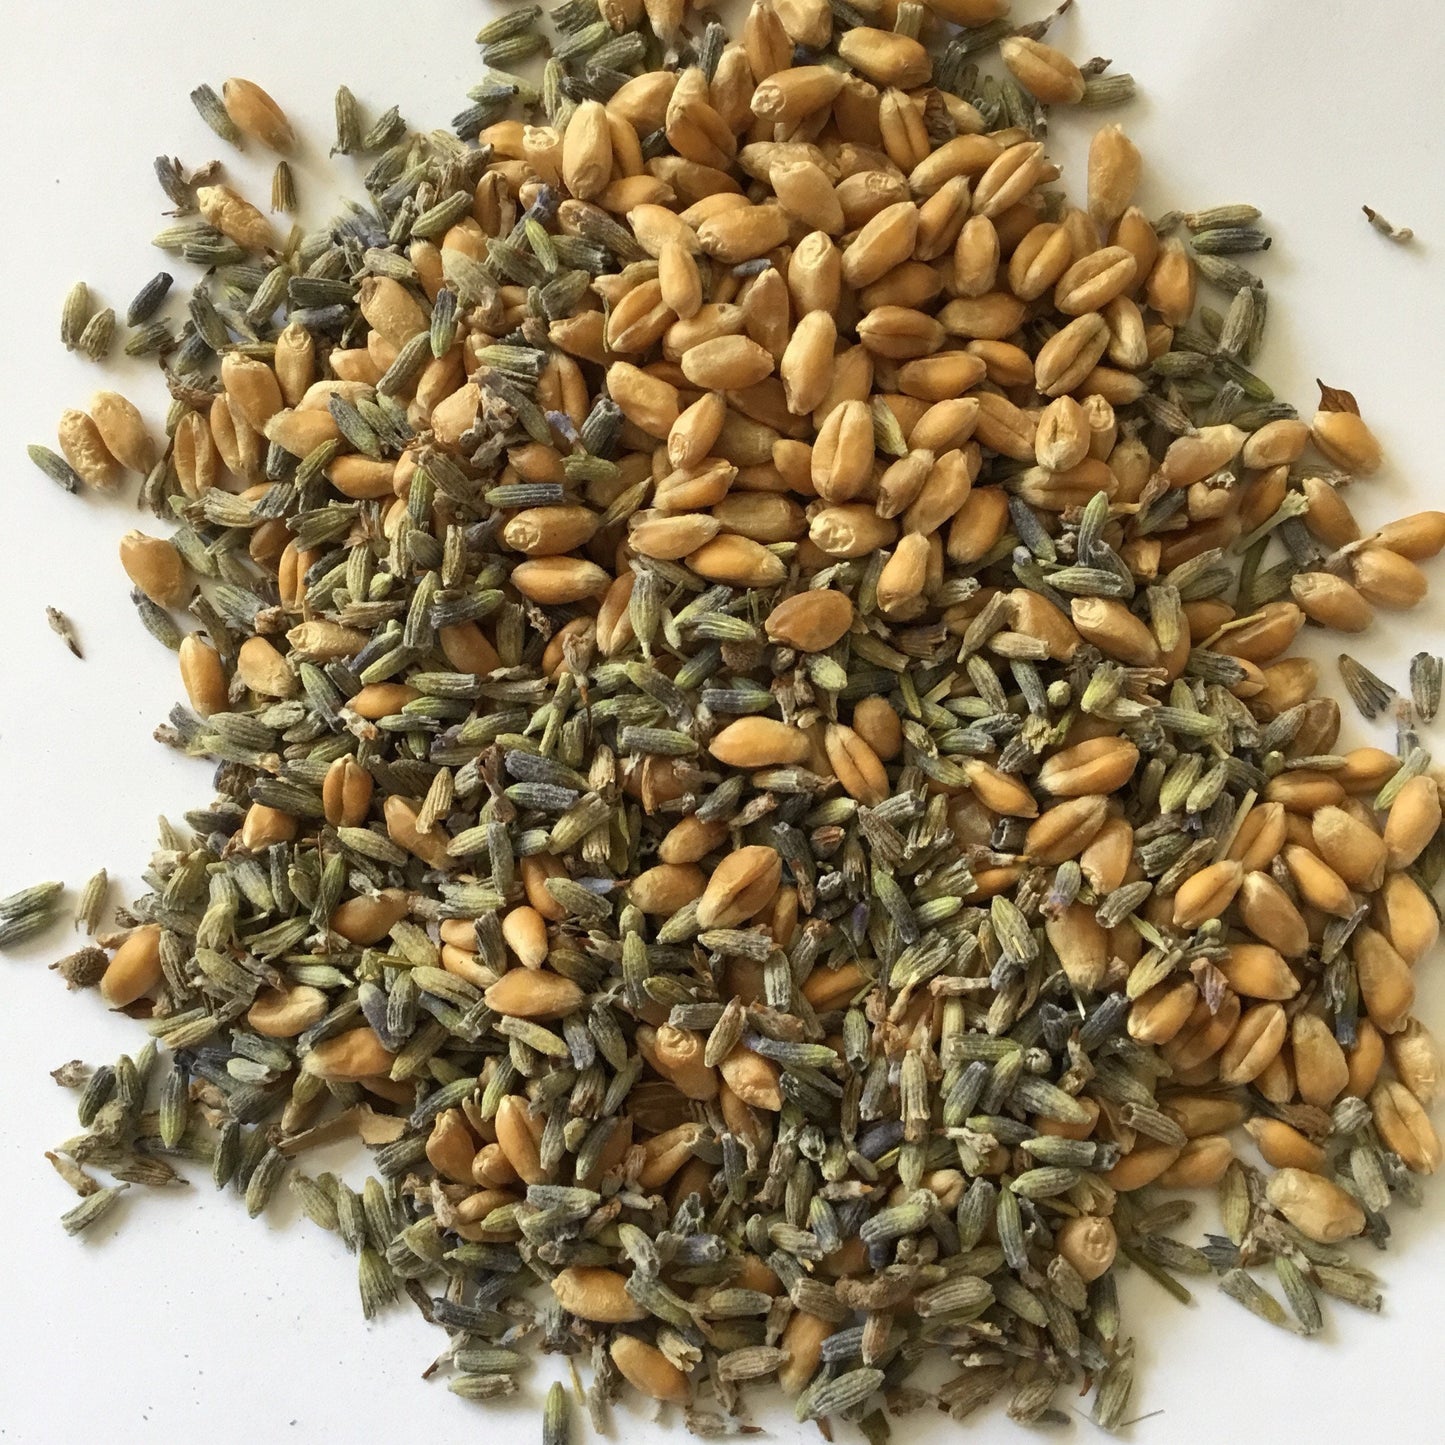 whest and lavender ingredients for a natural heatable body warming heat pad